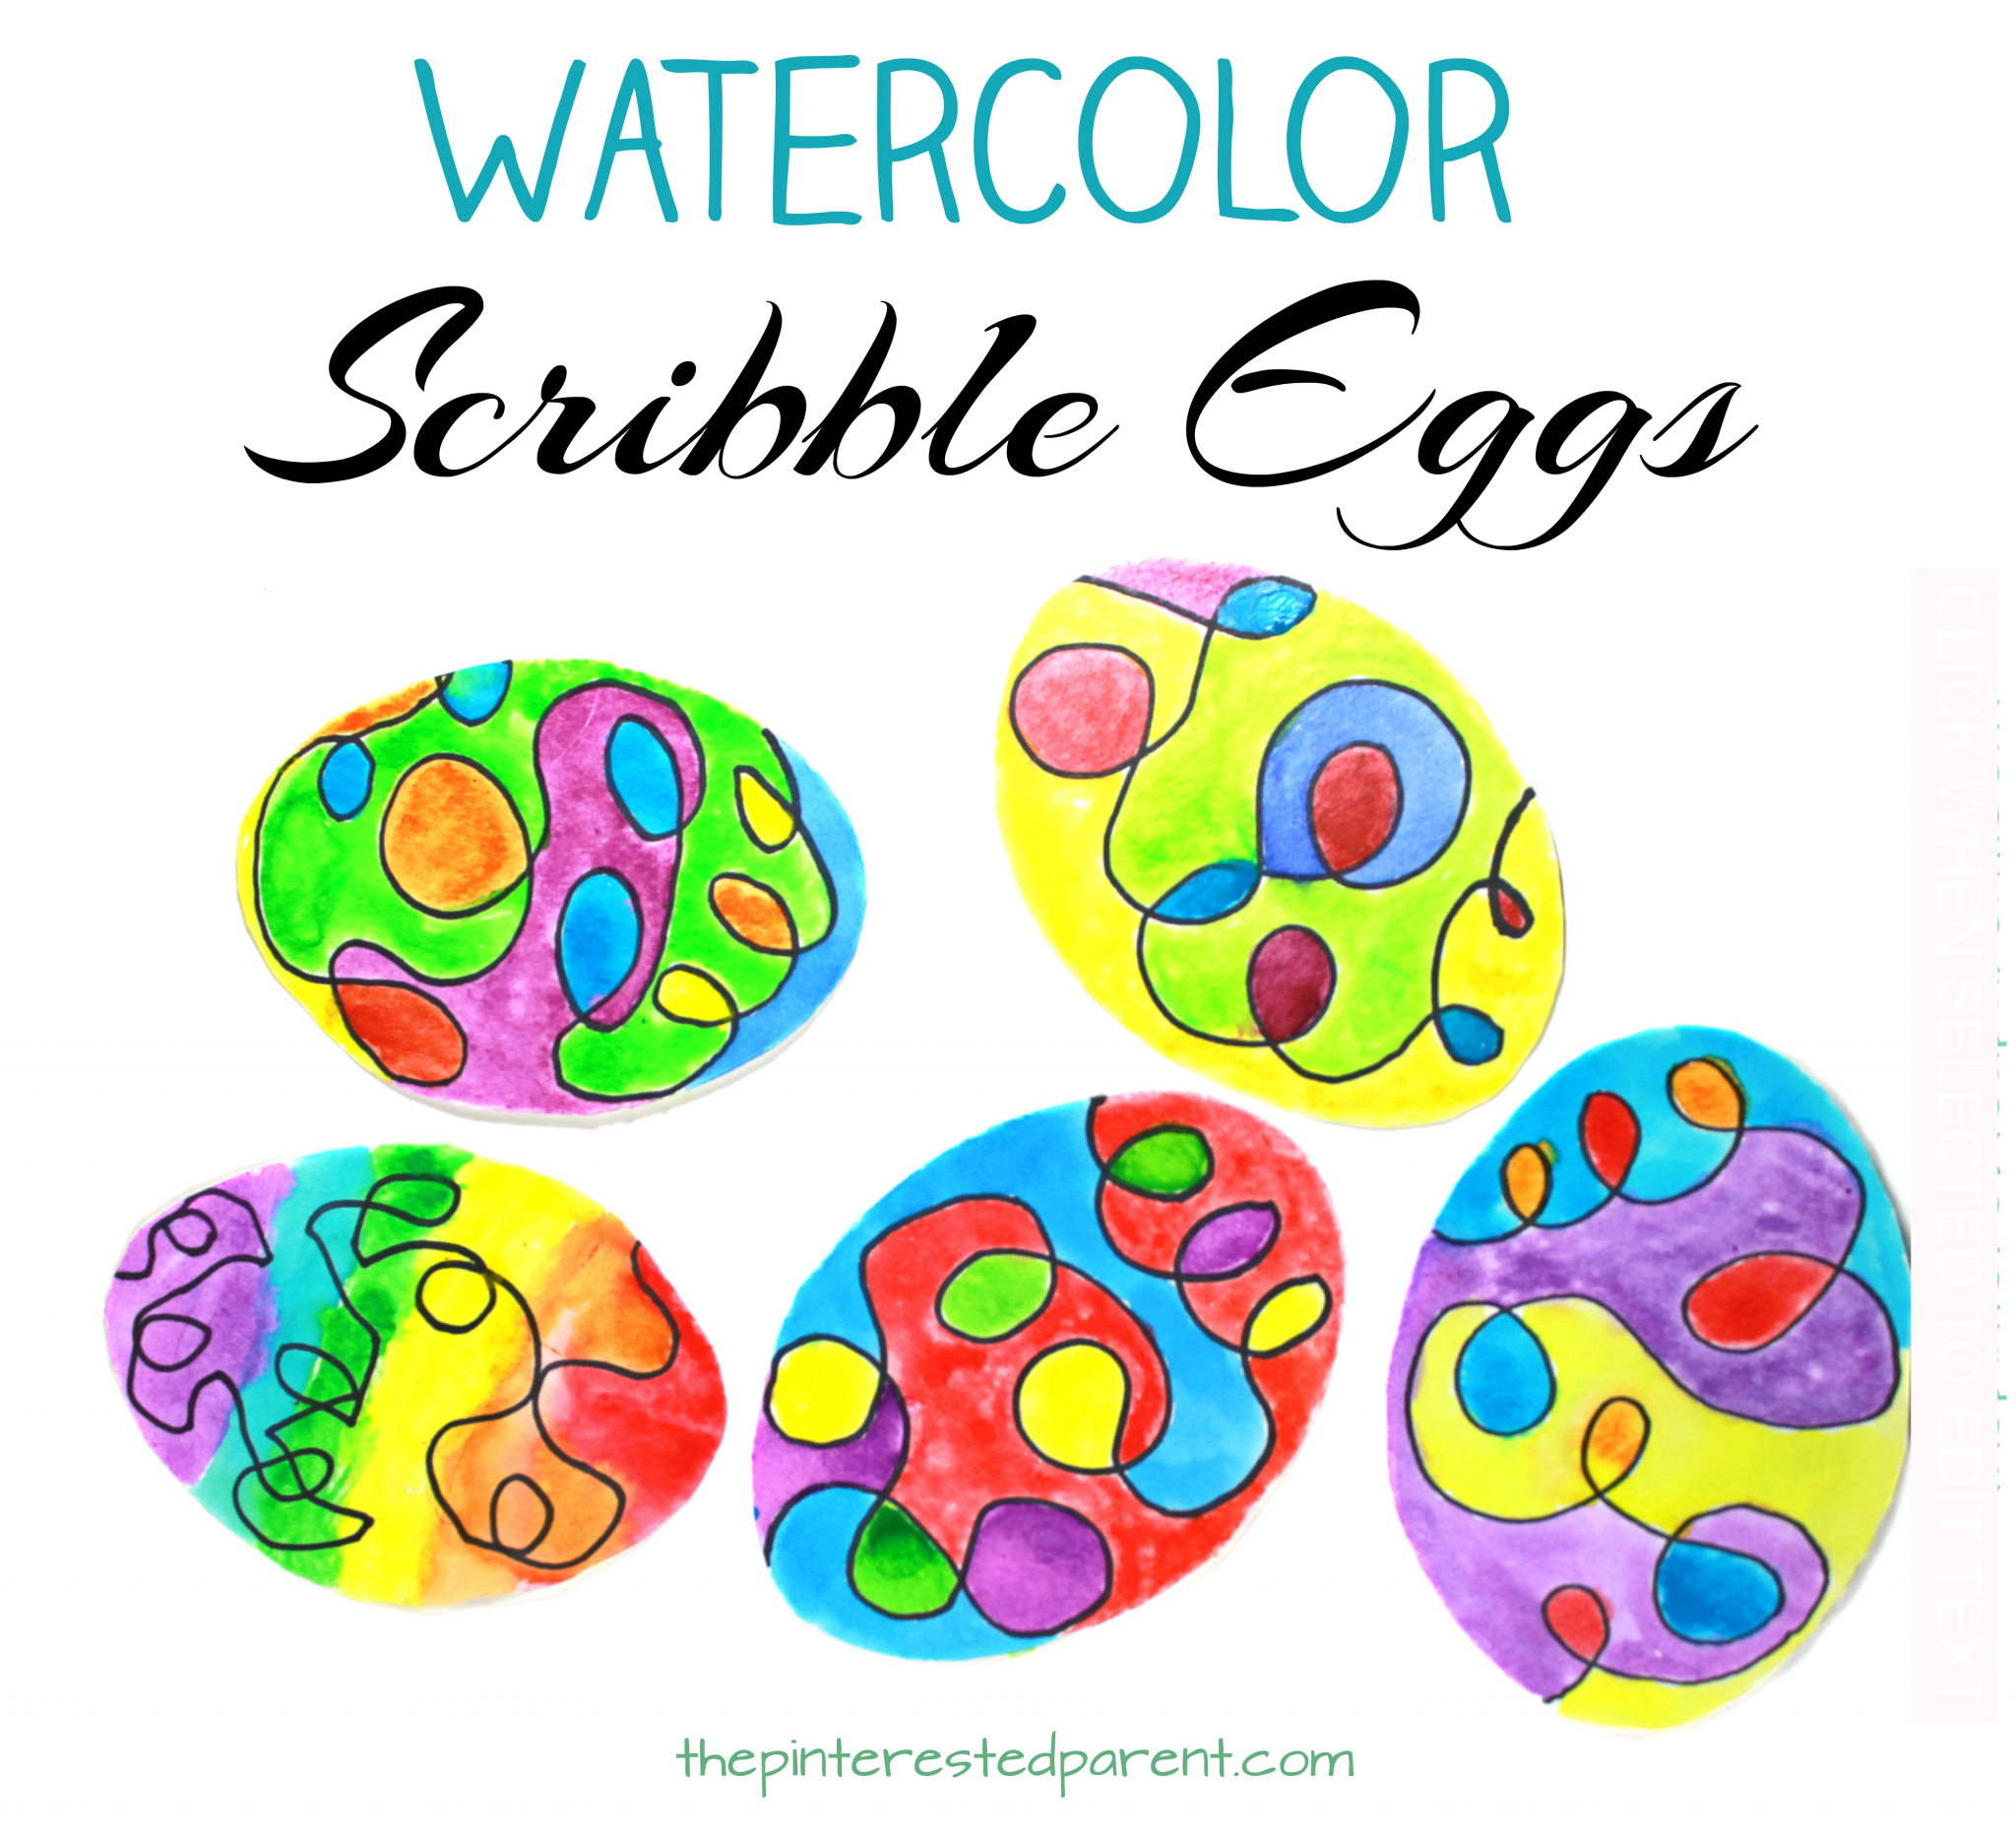 Watercolor scribble Easter eggs. A fun process art project for the kids. Arts and craft projects for the spring.